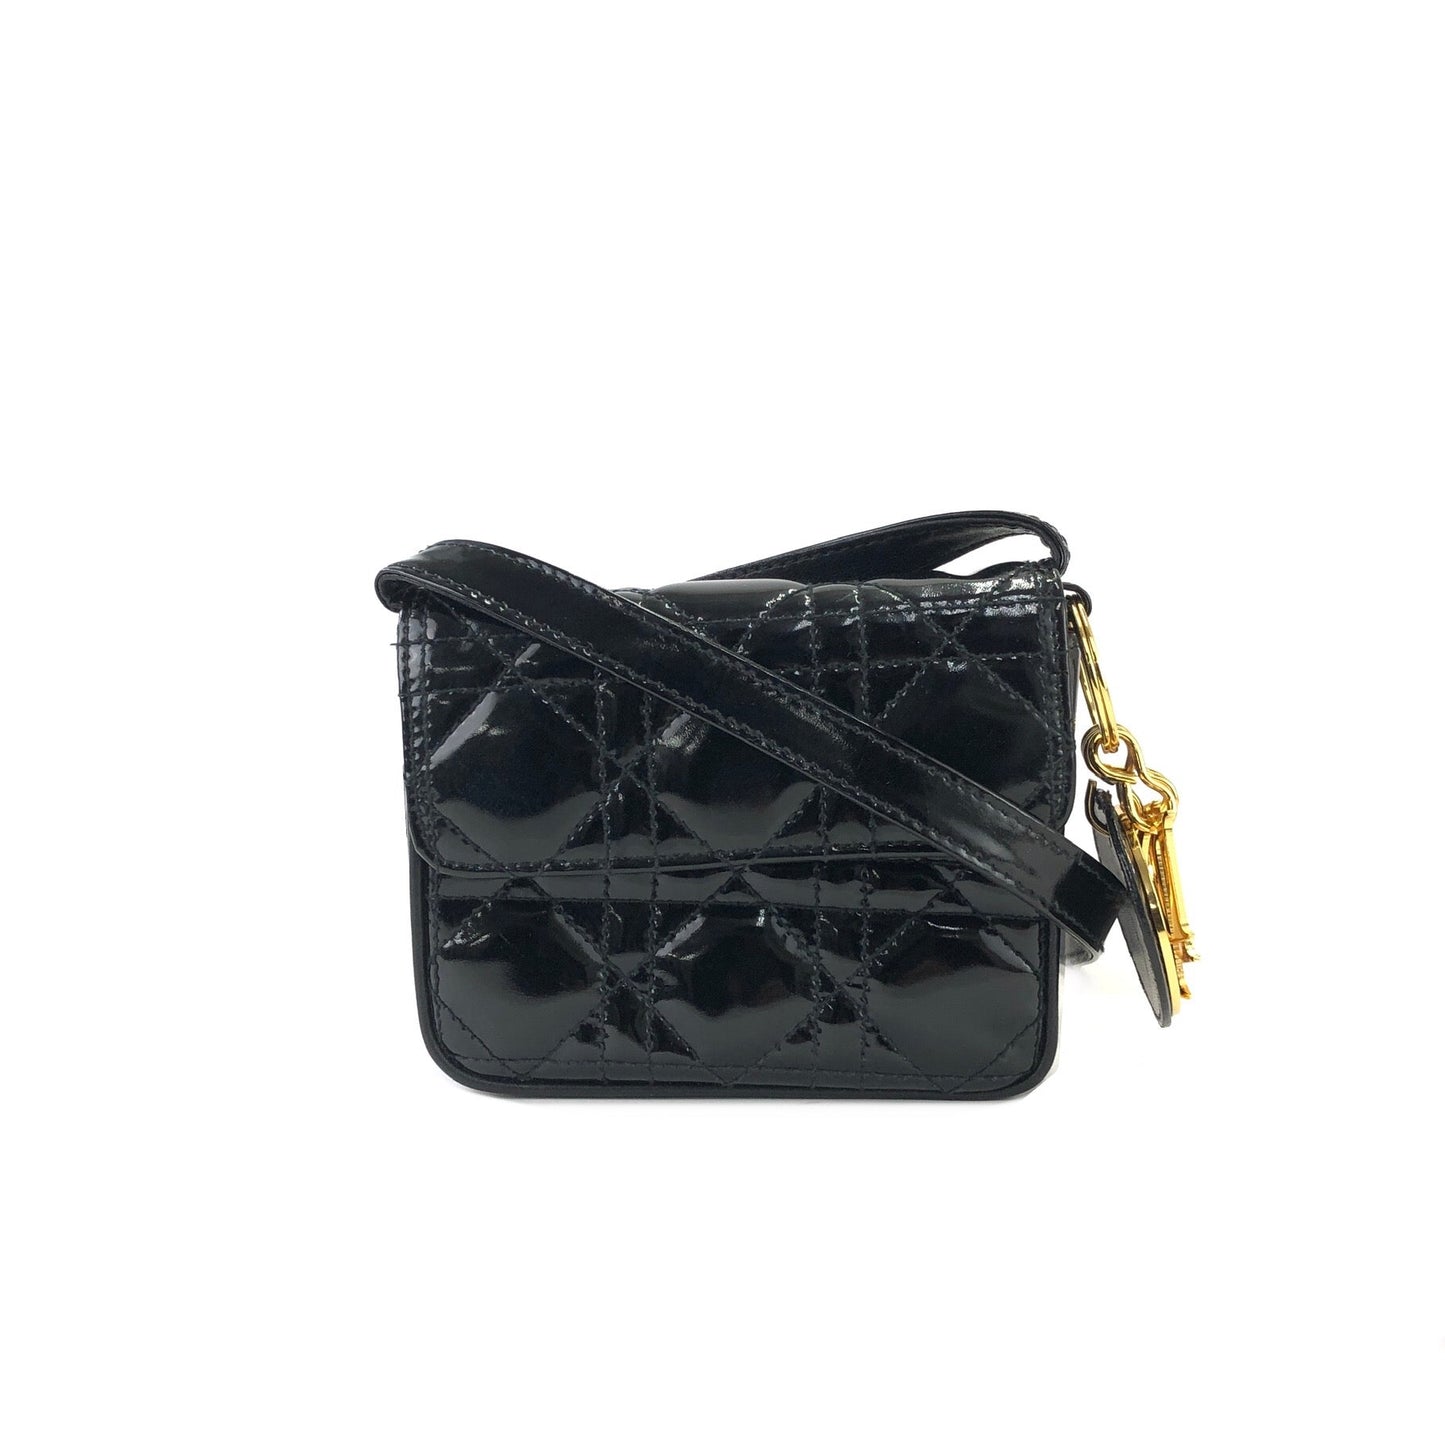 Christian Dior Cannage Lady dior Patent leather Crossbody Small Shoulder bag Black 8xicb6